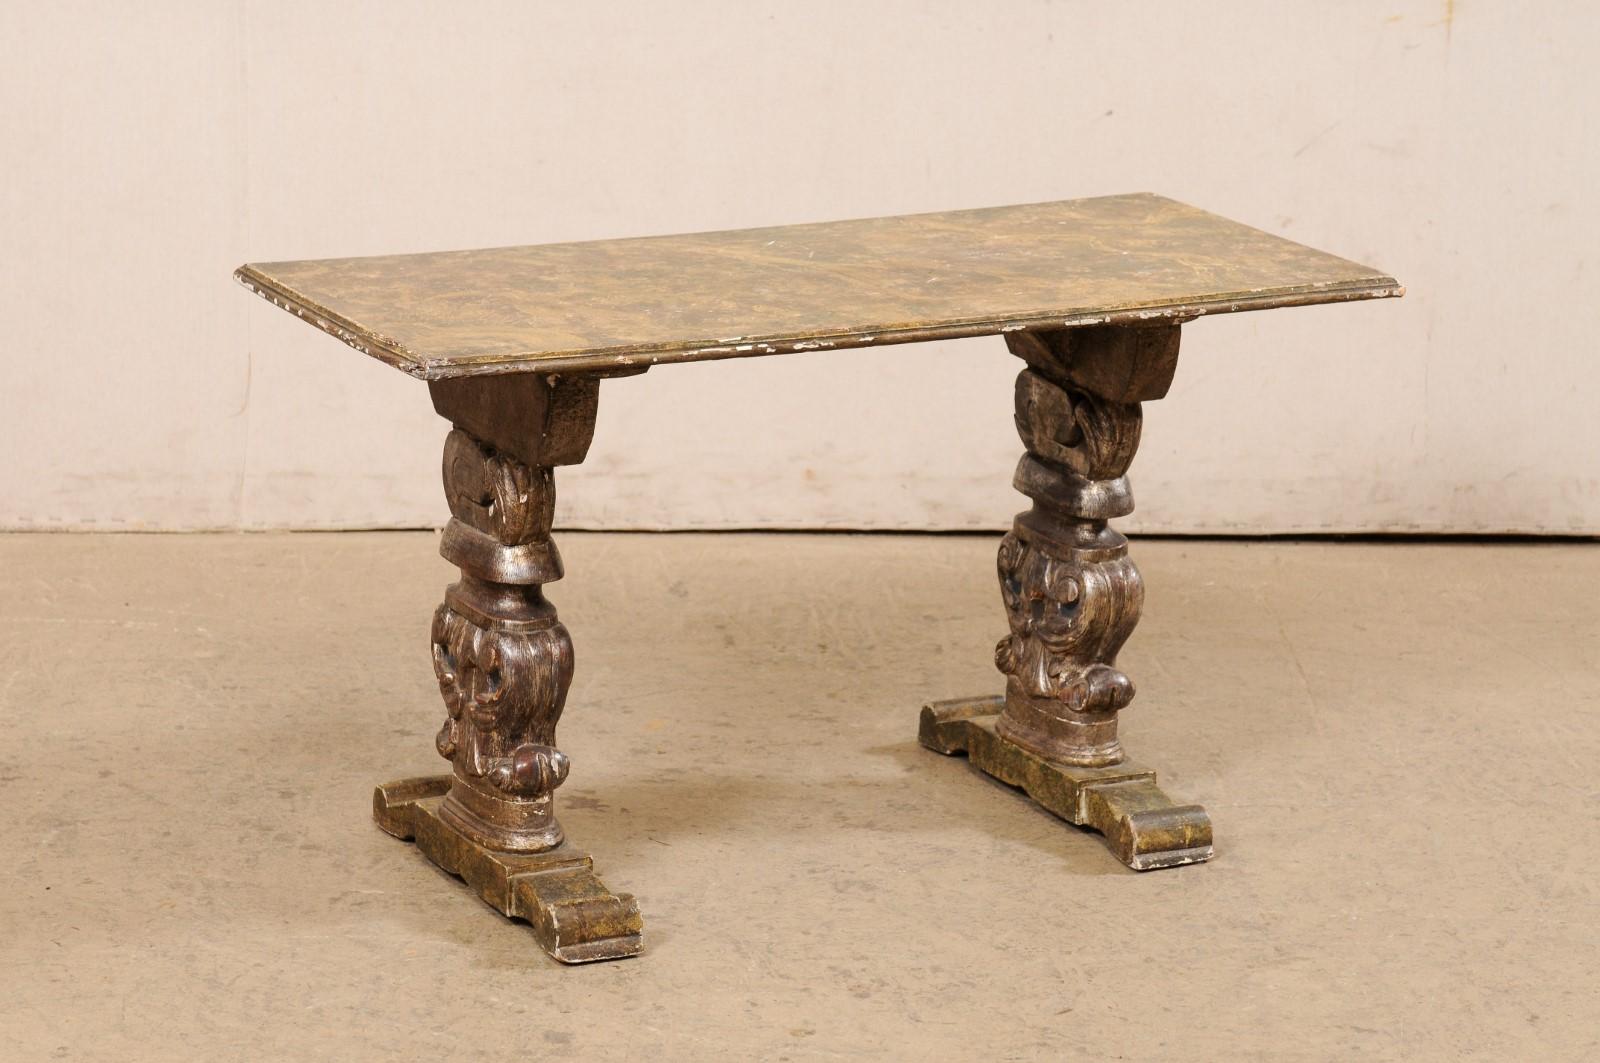 An Italian carved and painted wood coffee table from the turn of the 19th and 20th century. This antique table from Italy has a rectangular-shaped top, which is raised upon a pair of trestle style legs. Each leg is beautifully carved with volute and